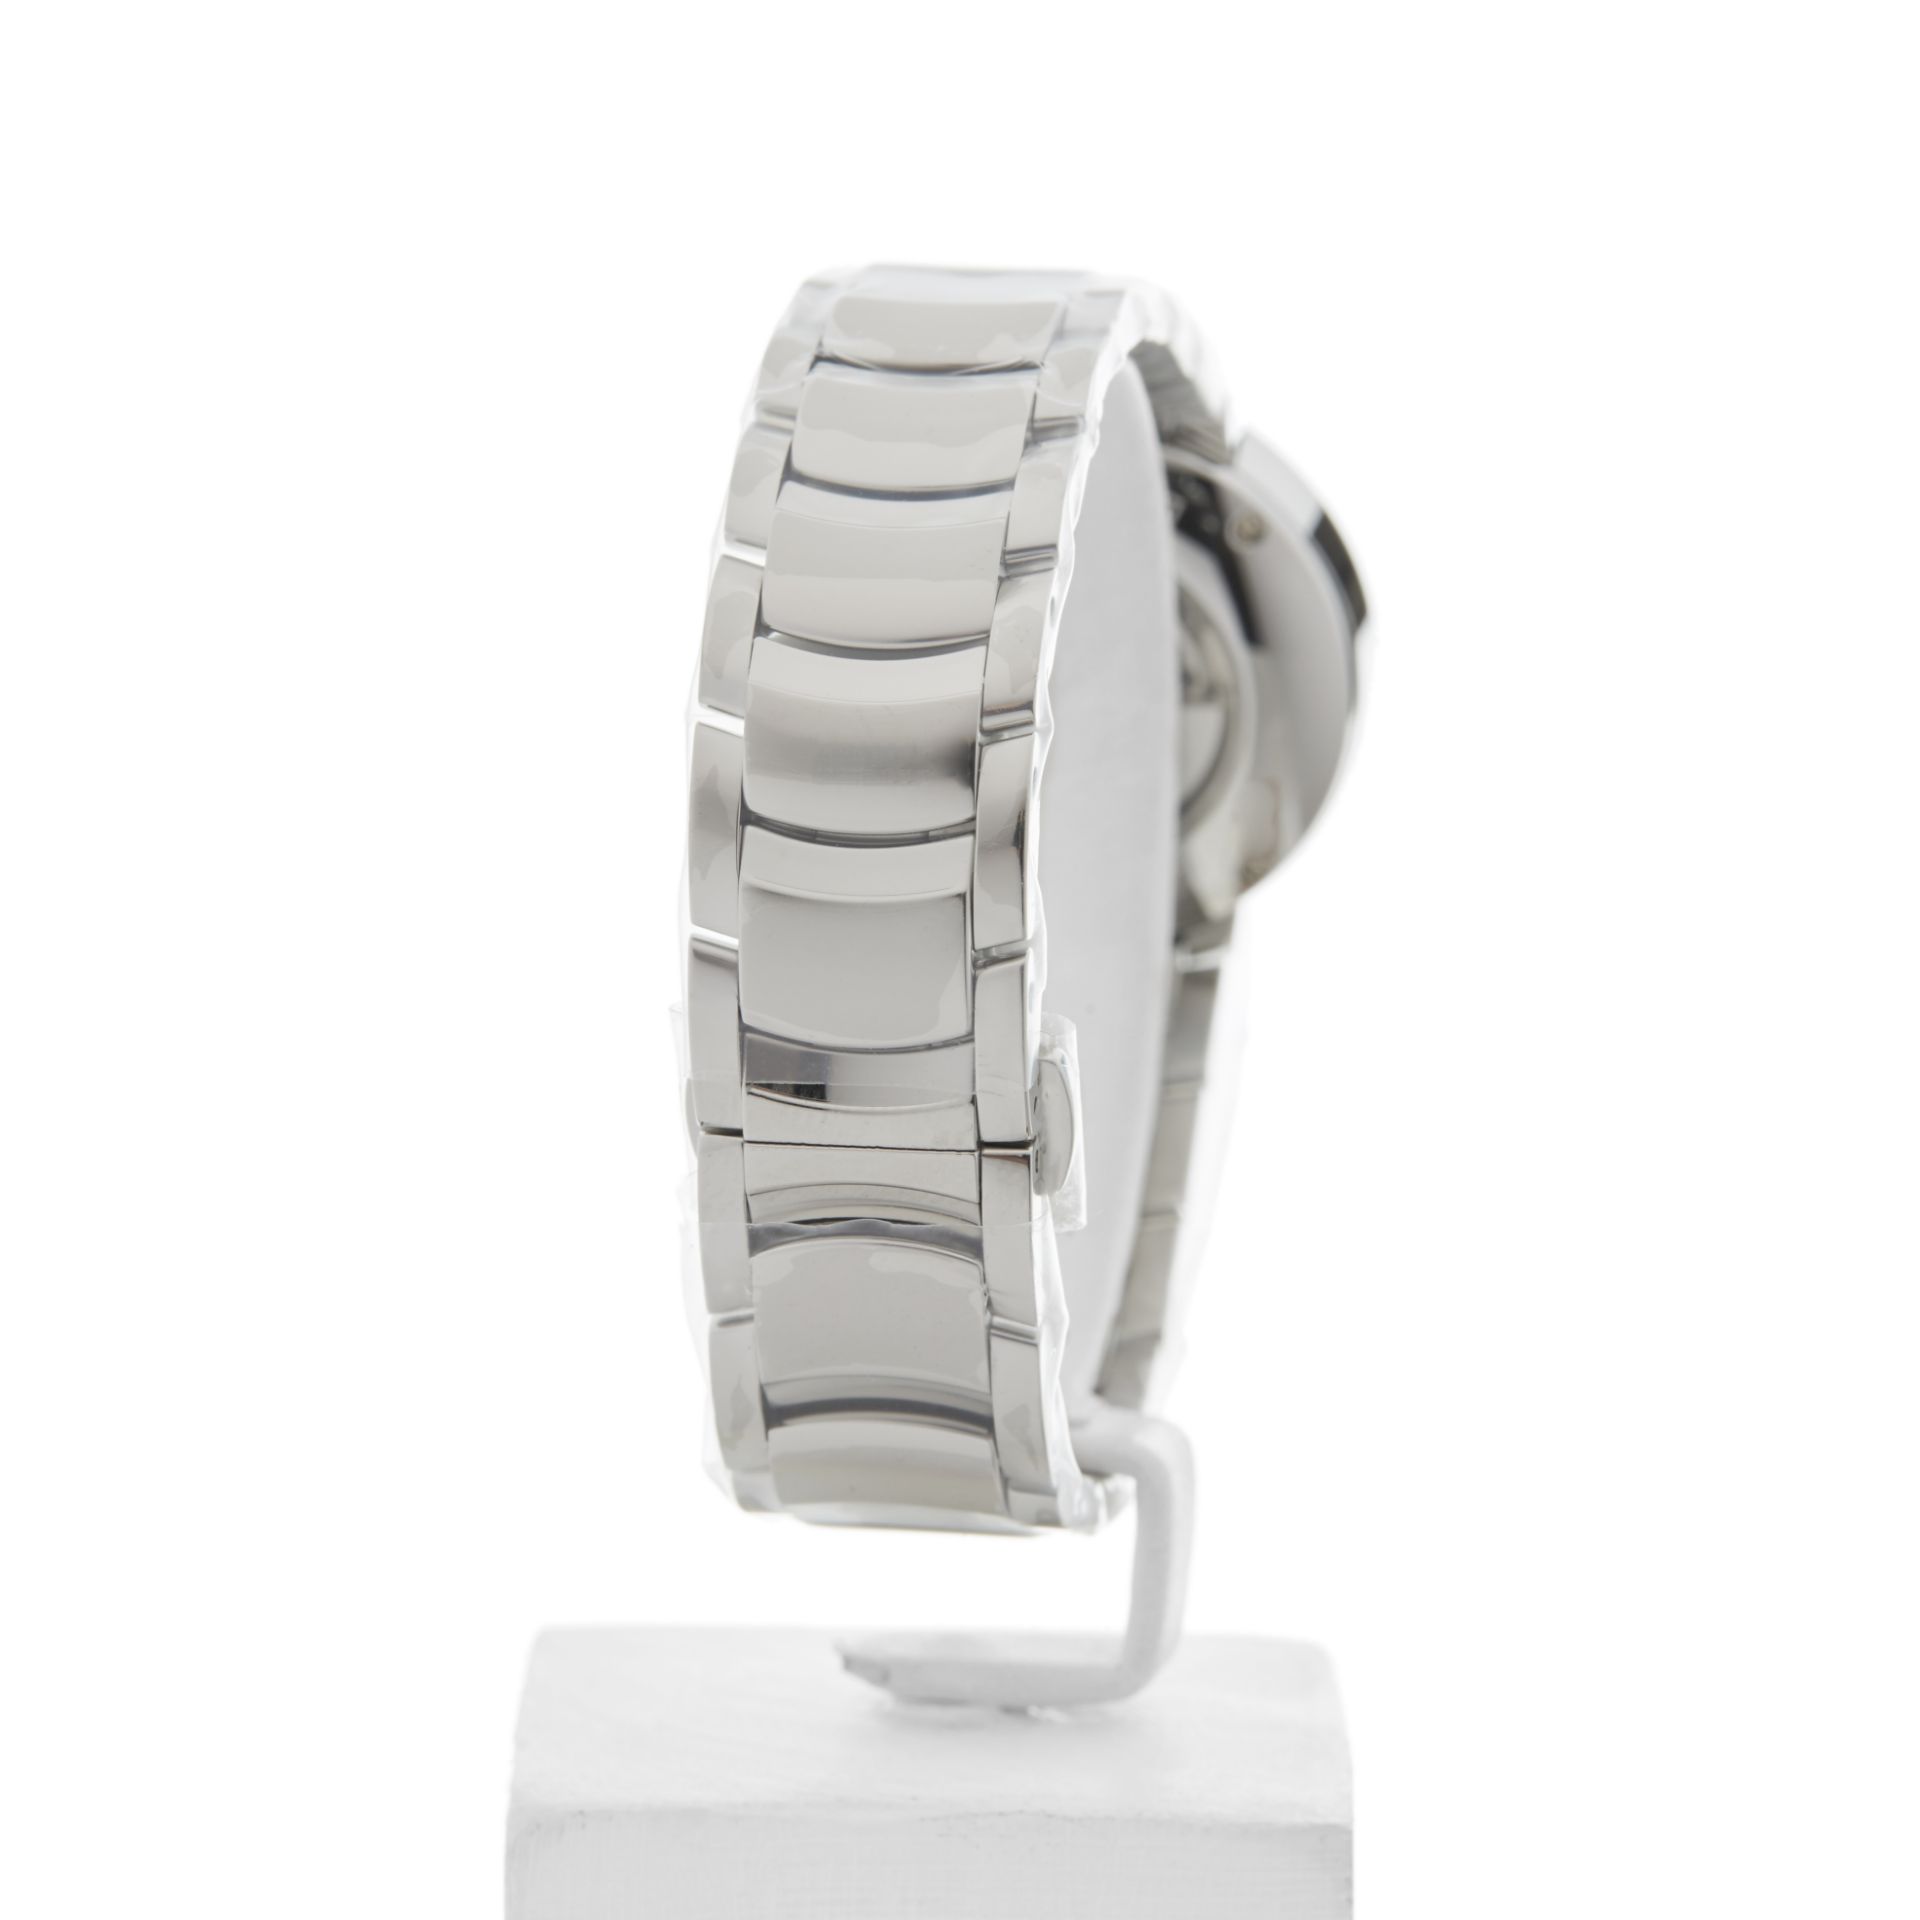 Baume & Mercier, Promesse 30mm Stainless Steel M0A10184 - Image 7 of 8